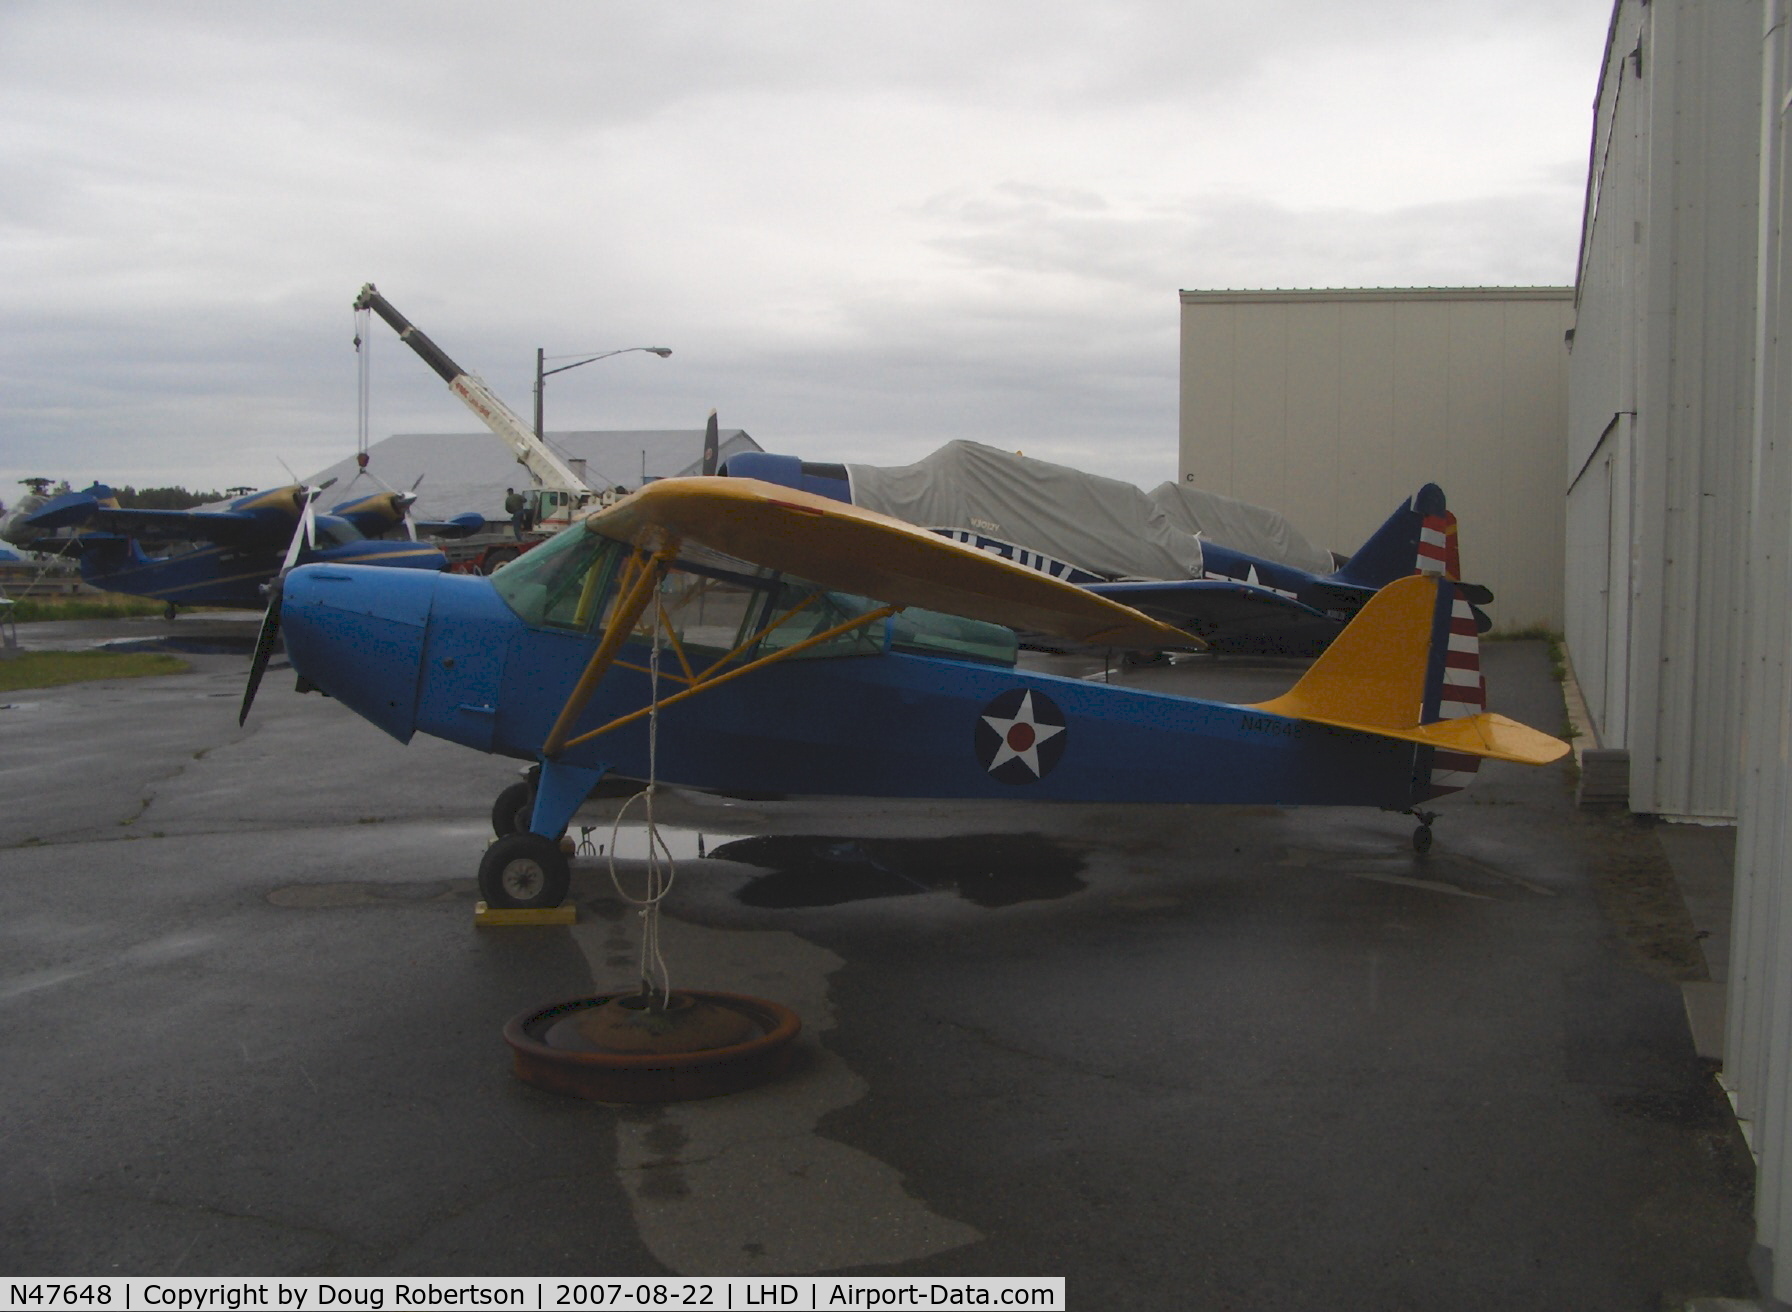 N47648, 1943 Taylorcraft DCO-65 C/N 5416, 1943 Taylorcraft DCO as L-2A-TA GRASSHOPPER liaison, Continental A&C65 65 Hp, tandem seating, cabin mod for visibility, at Alaska Aviation Heritage Museum